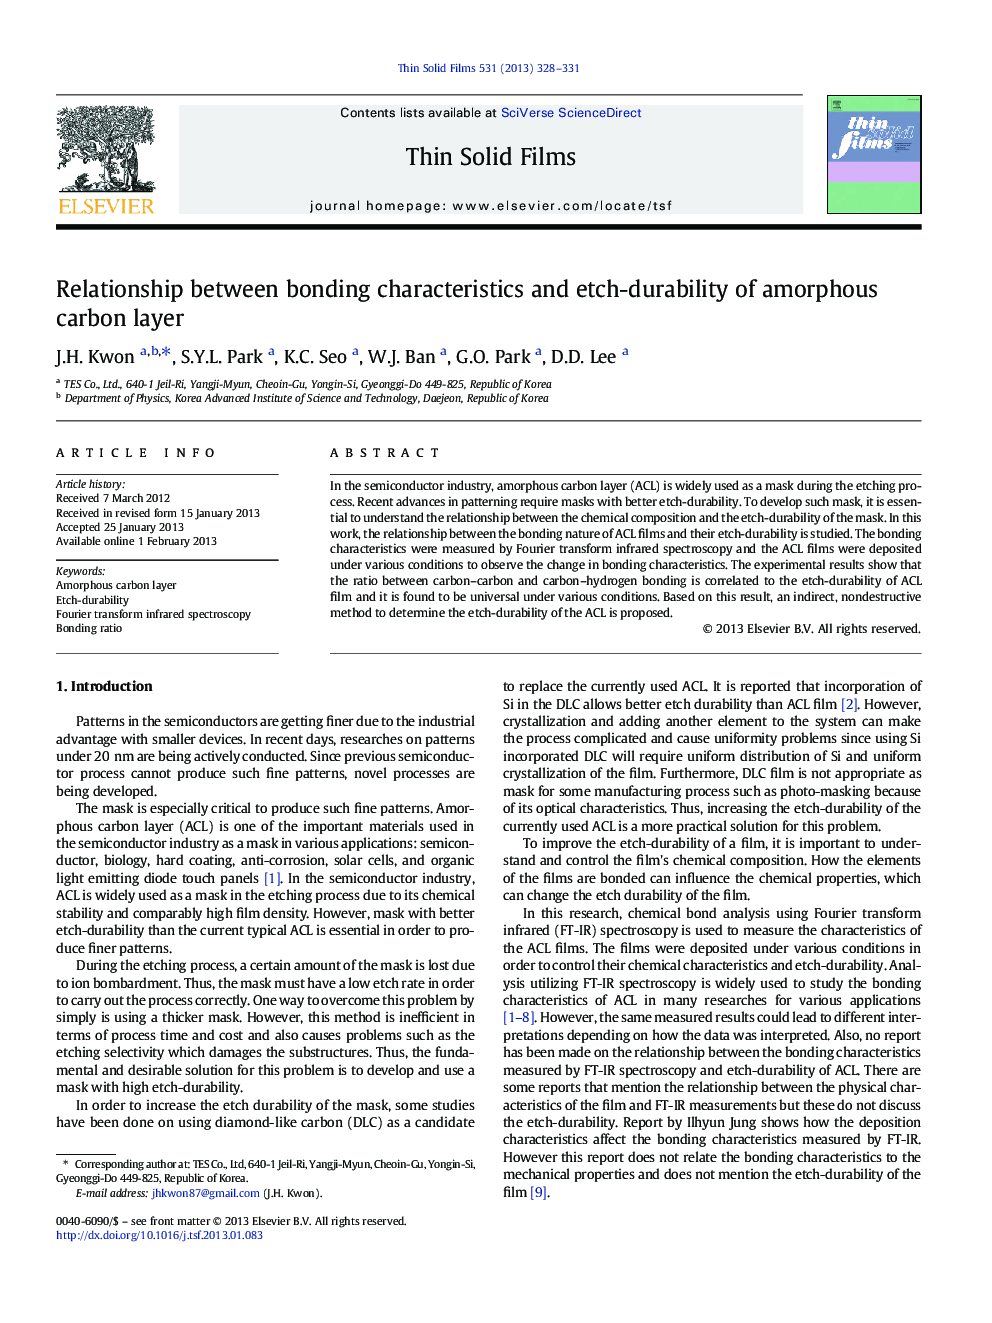 Relationship between bonding characteristics and etch-durability of amorphous carbon layer